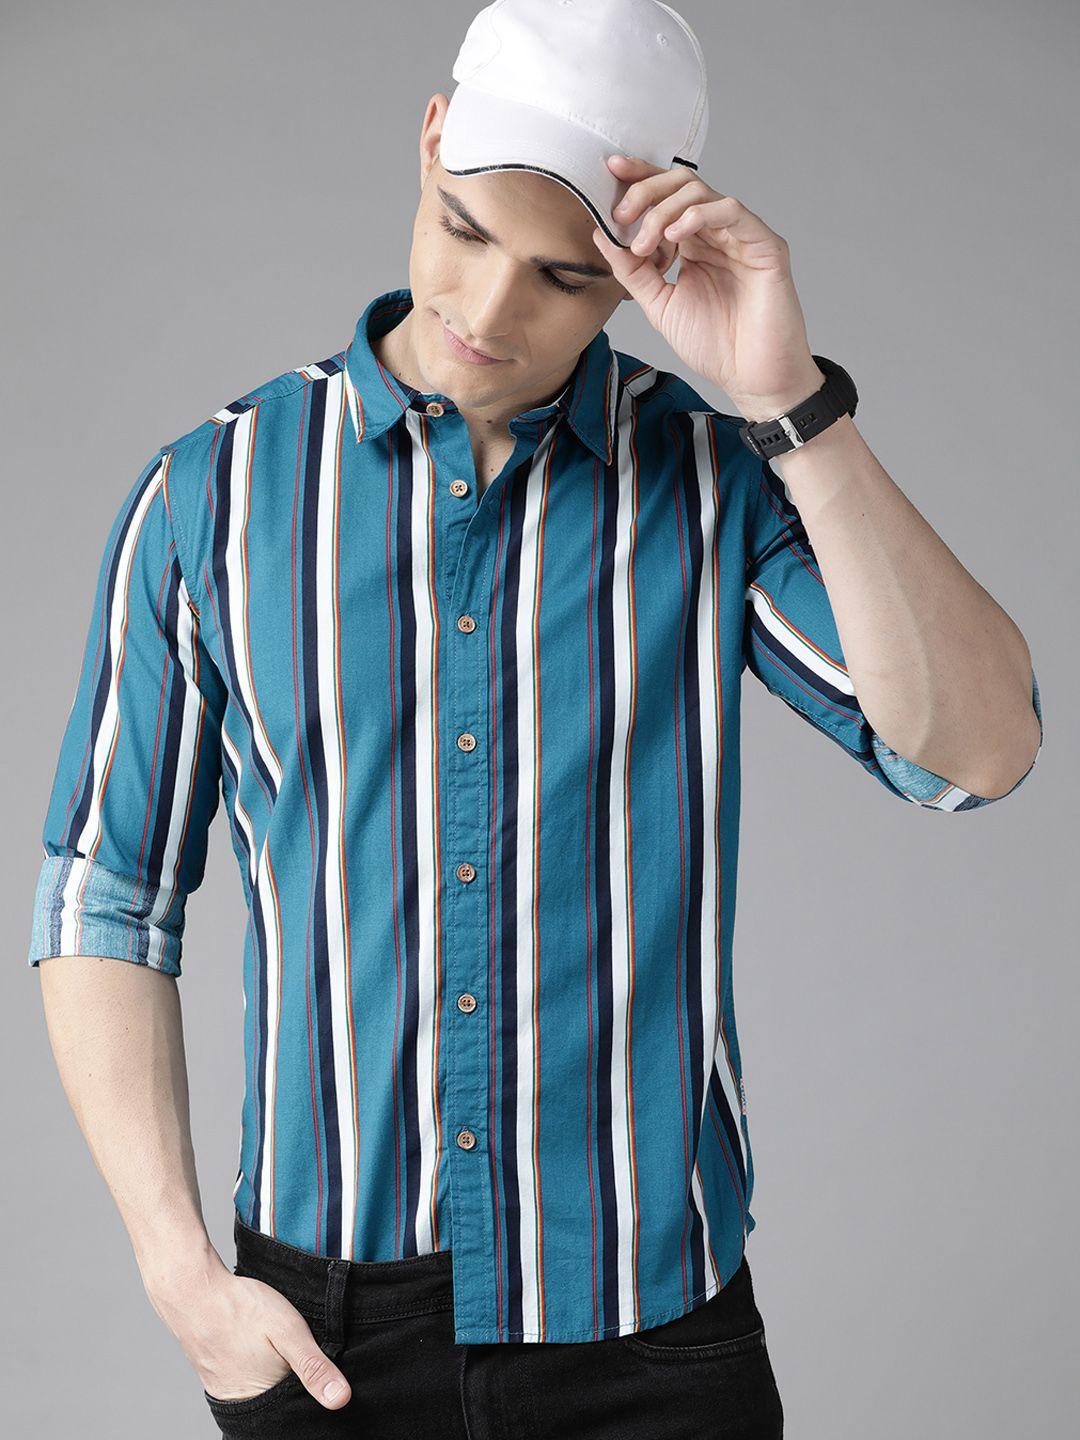 beat london by pepe jeans men teal blue & off-white pure cotton slim fit striped shirt